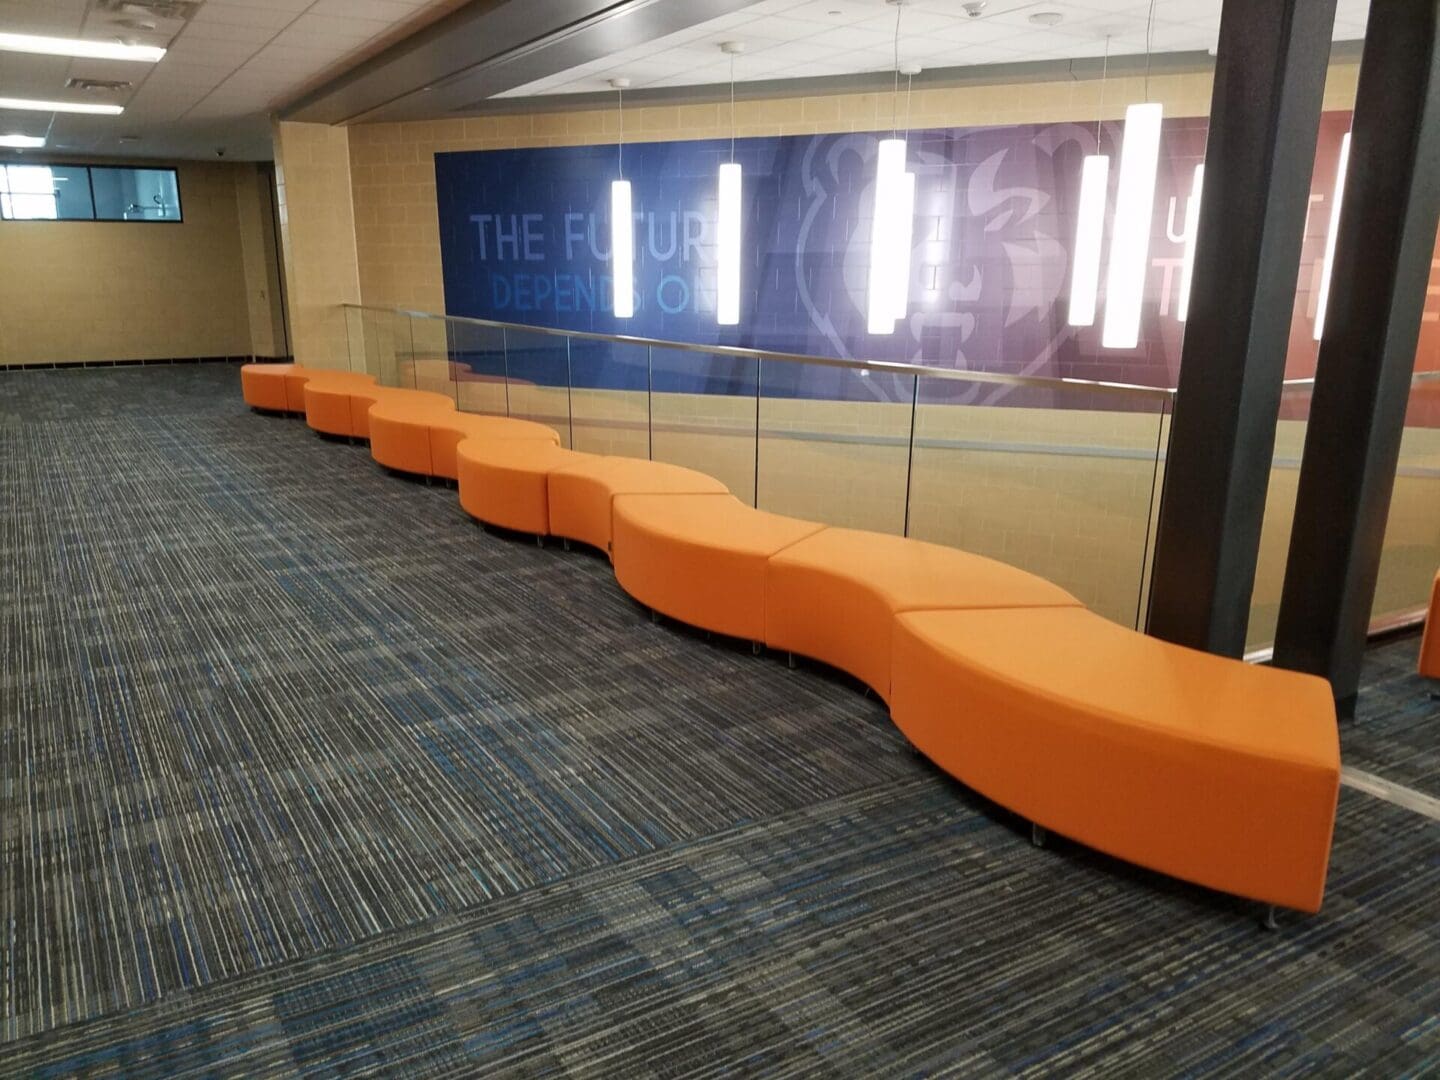 A row of orange benches in front of a wall.